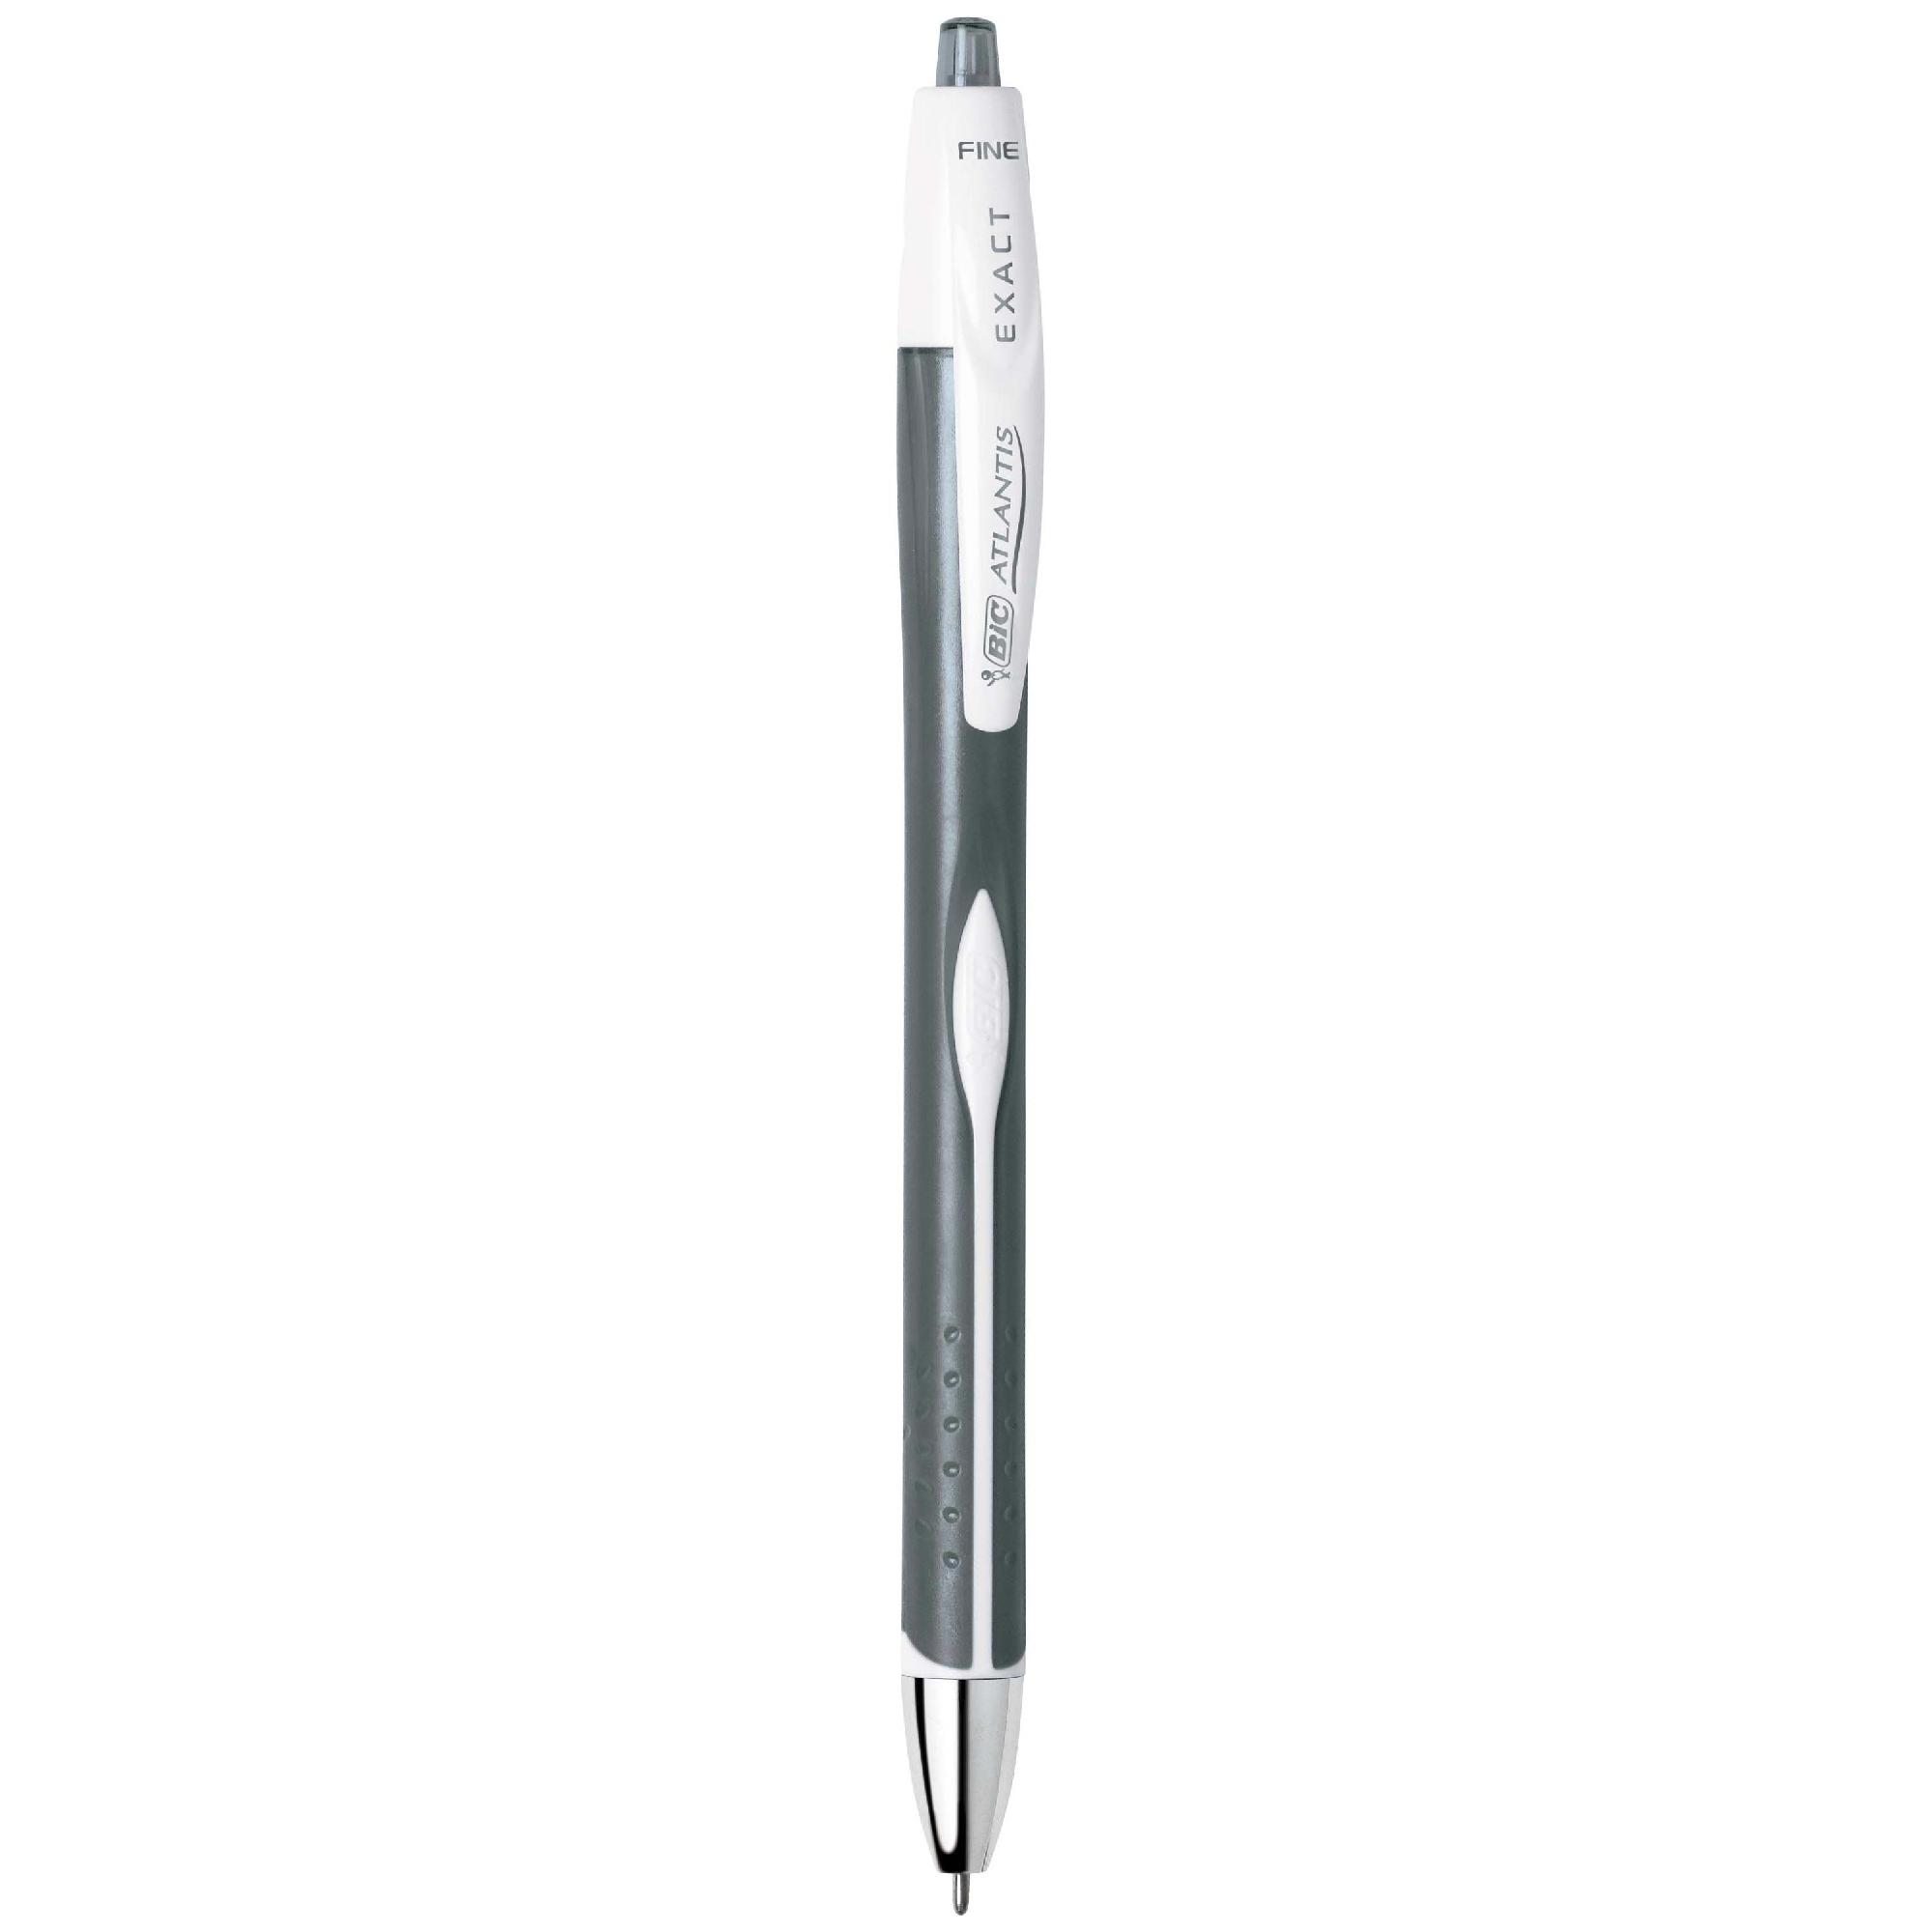 BIC Glide Exact Retractable Ball Point Pens, Fine Point, 0.7 mm, Black Ink, Pack of 3 - image 3 of 8